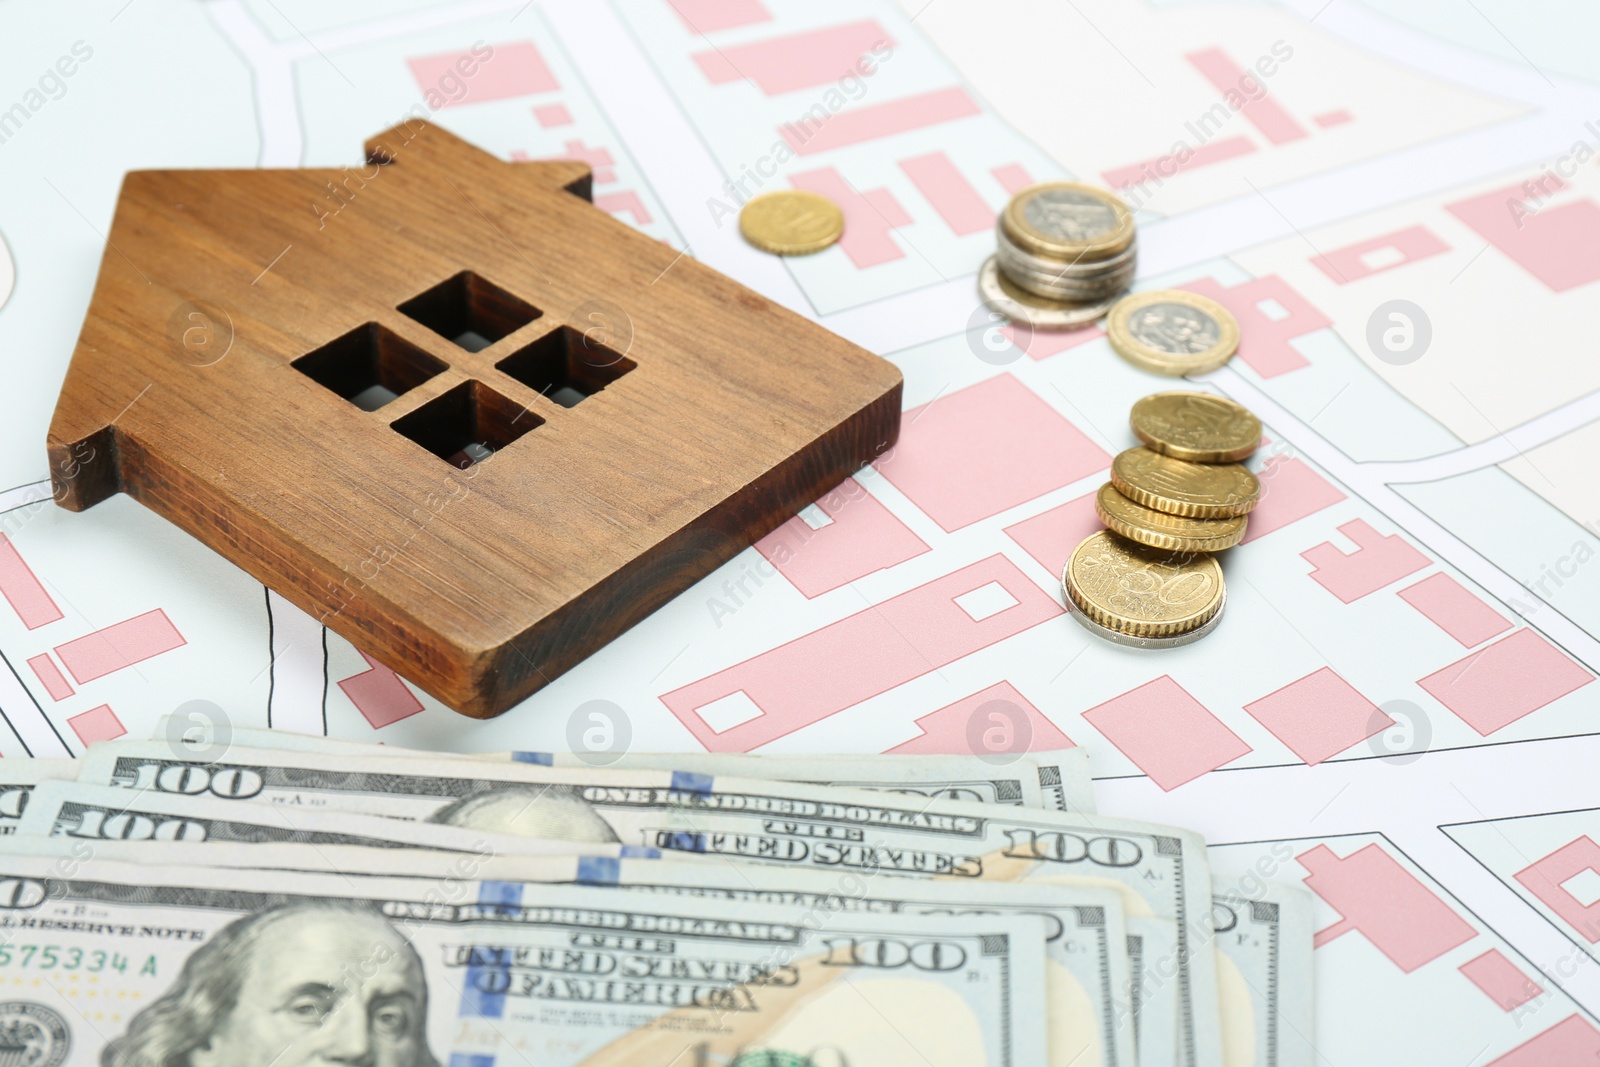 Photo of Money and wooden house model on cadastral map